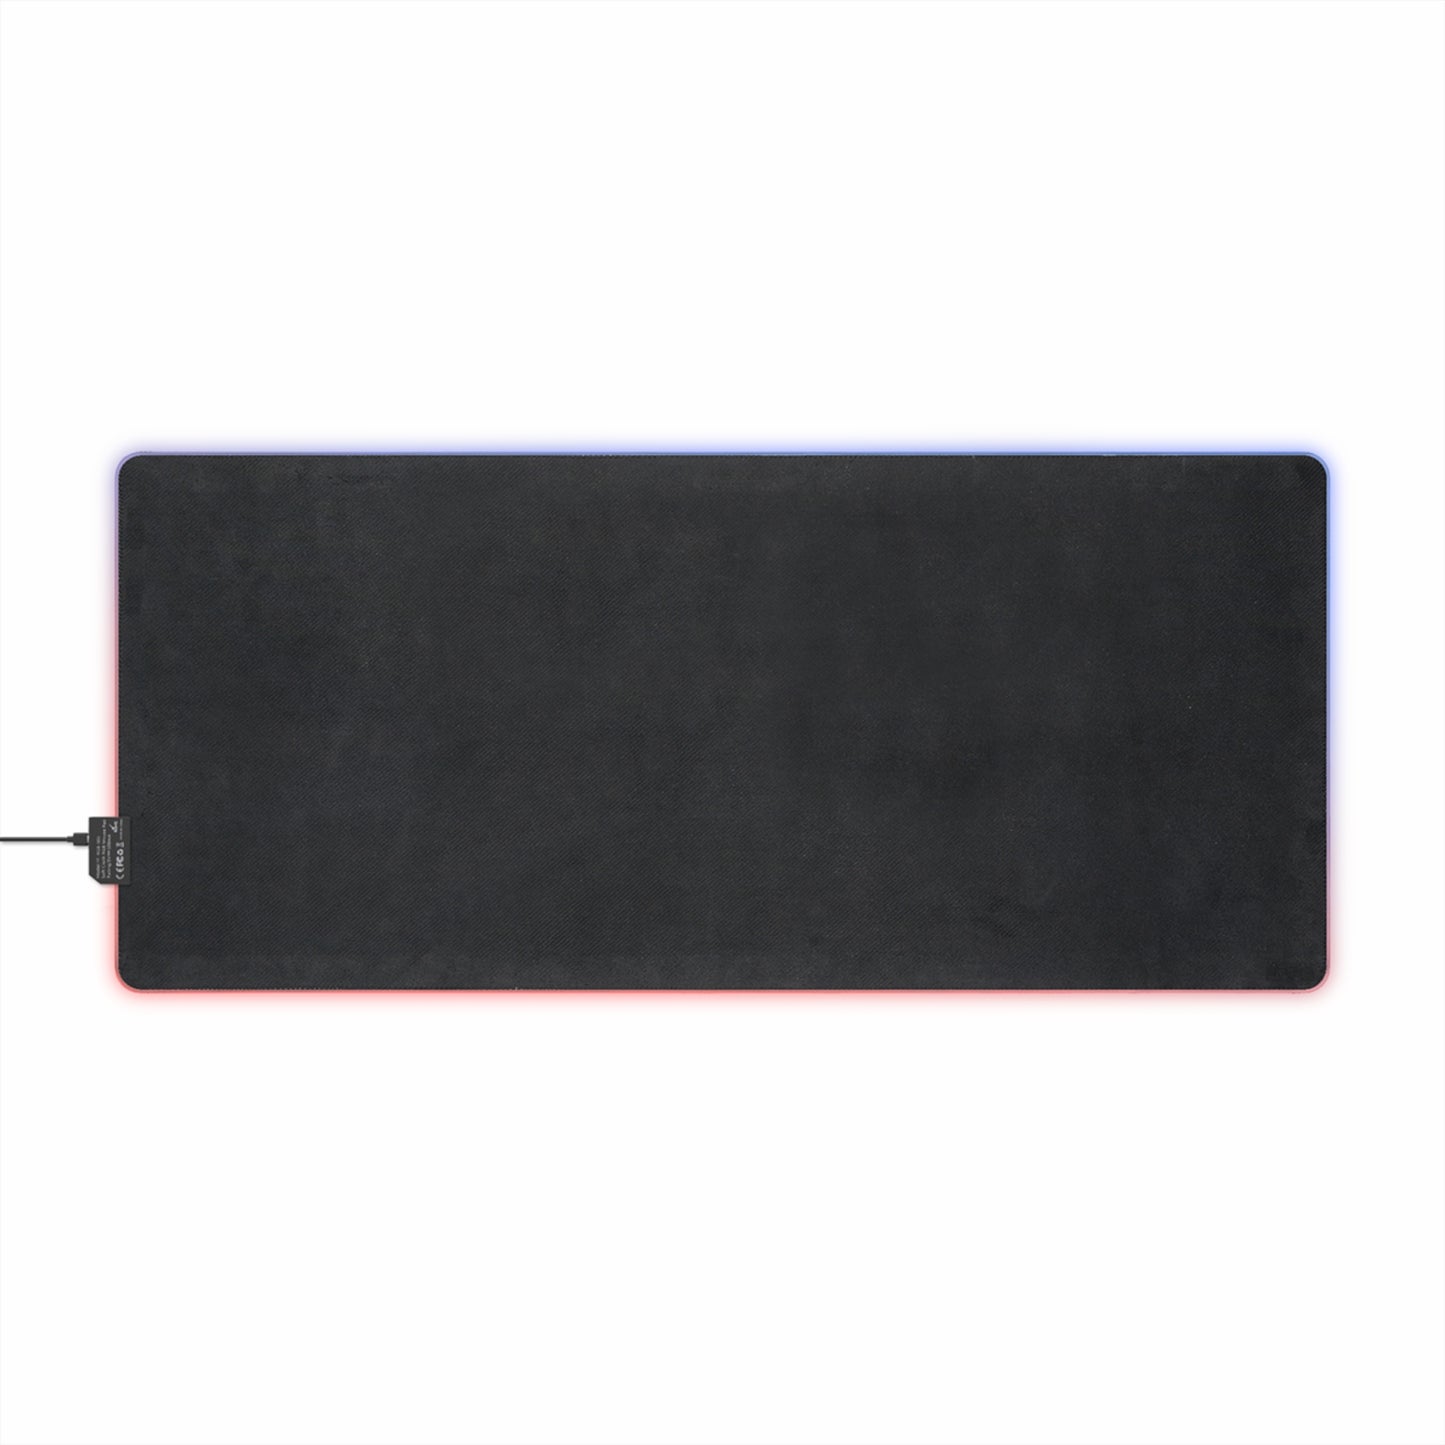 CLMP-5 LED Gaming Mouse Pad